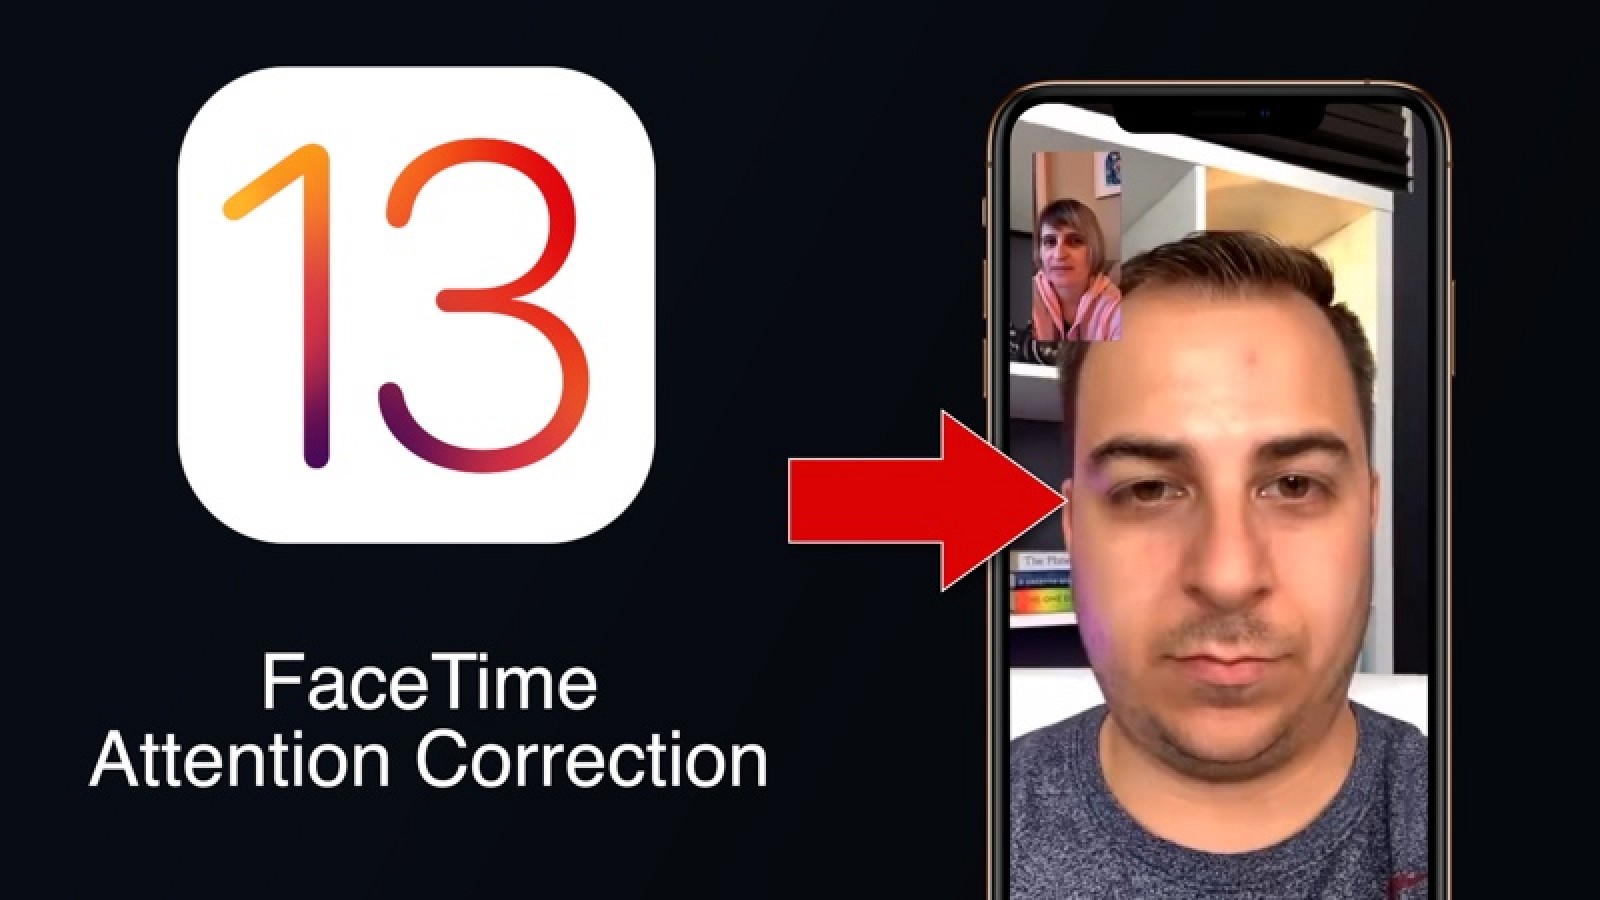 Testing the New FaceTime Attention Correction Feature in iOS 13